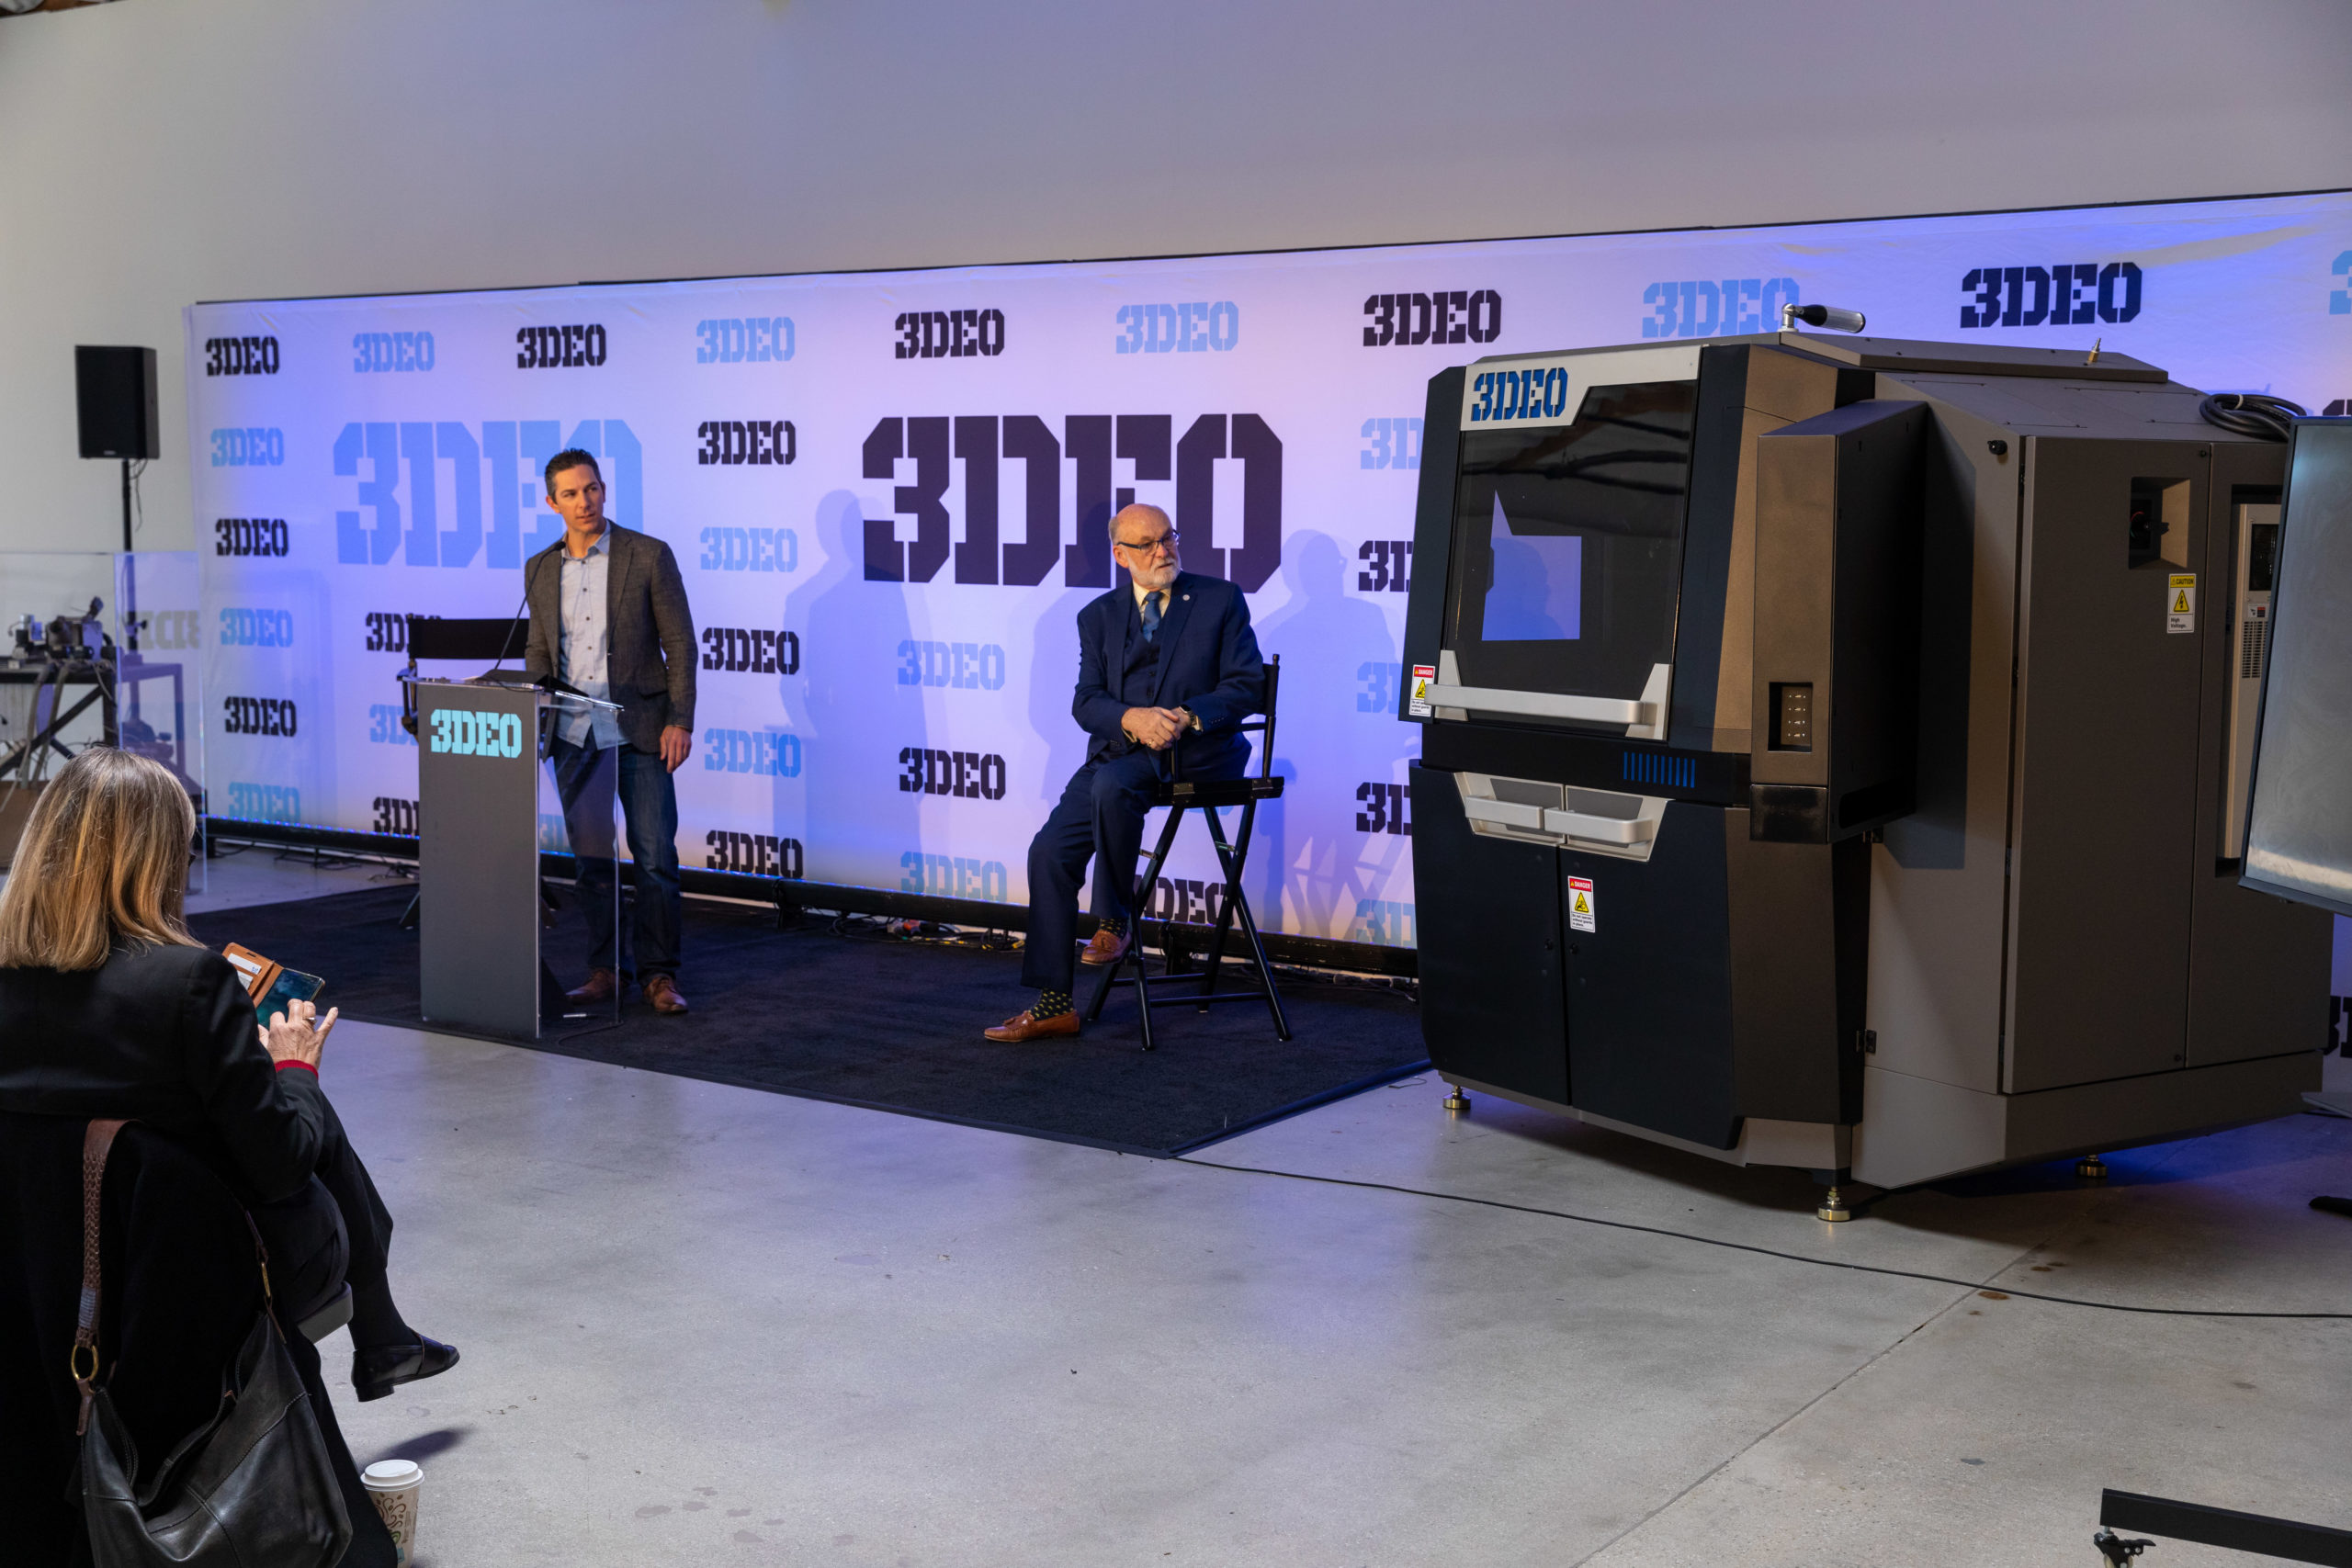 Two men, one standing and one seated, at a presentation in a room with large 3d printers and a branded backdrop with multiple logos.